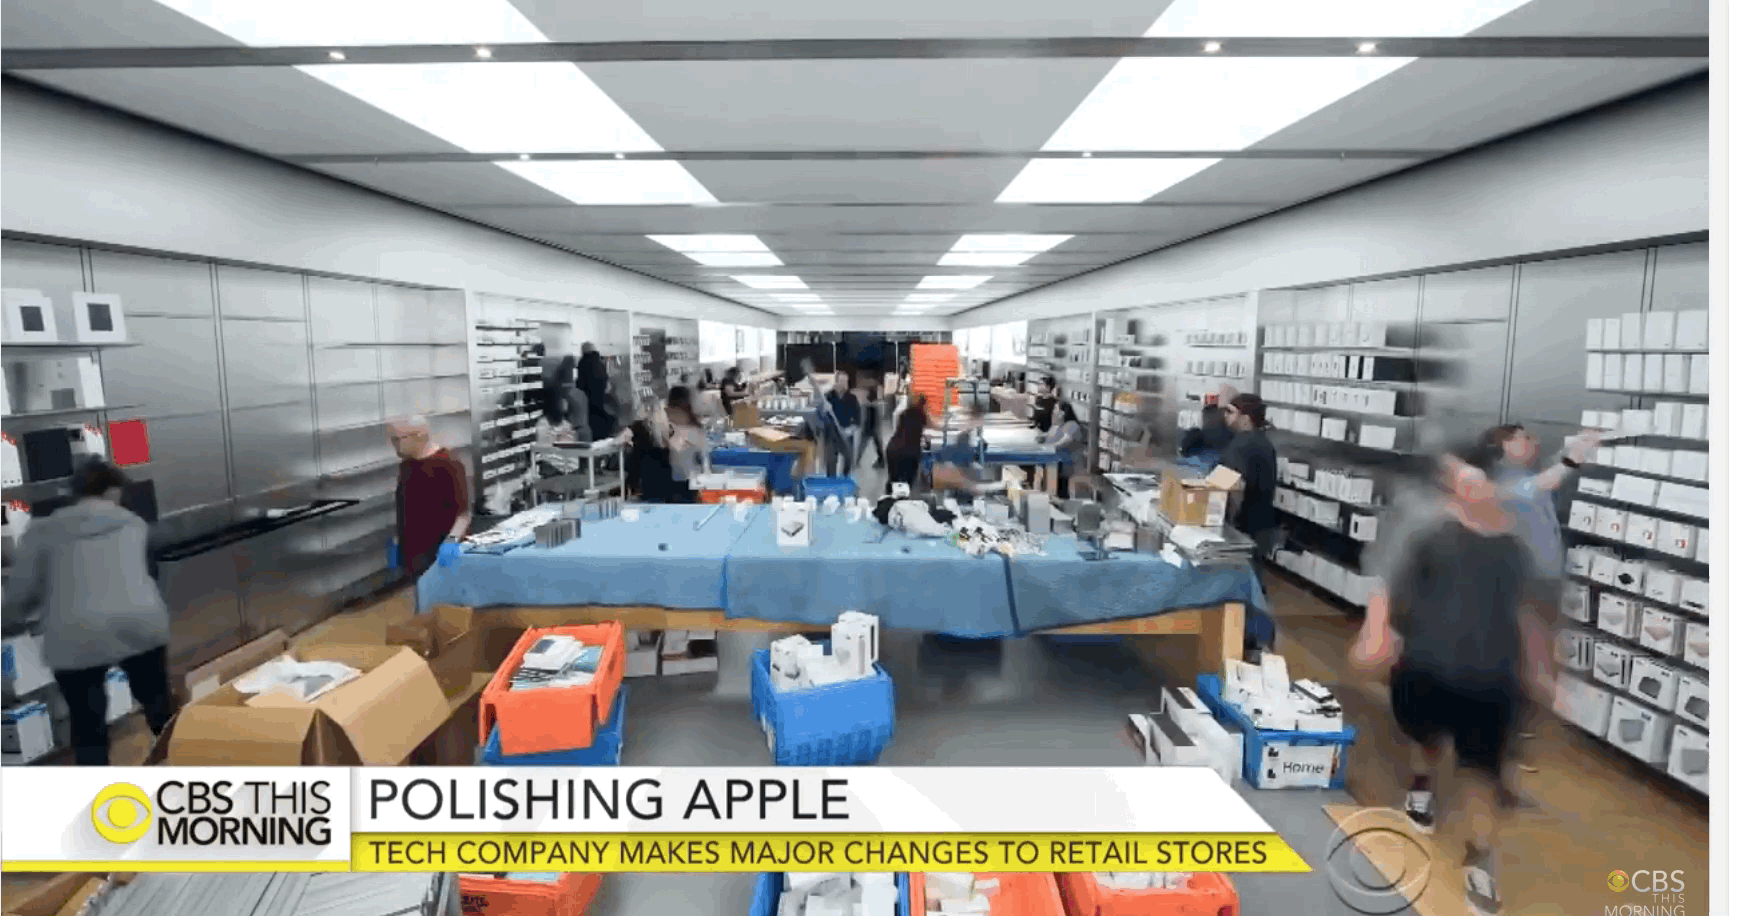 Cupertino has a new vision for the Apple Store.